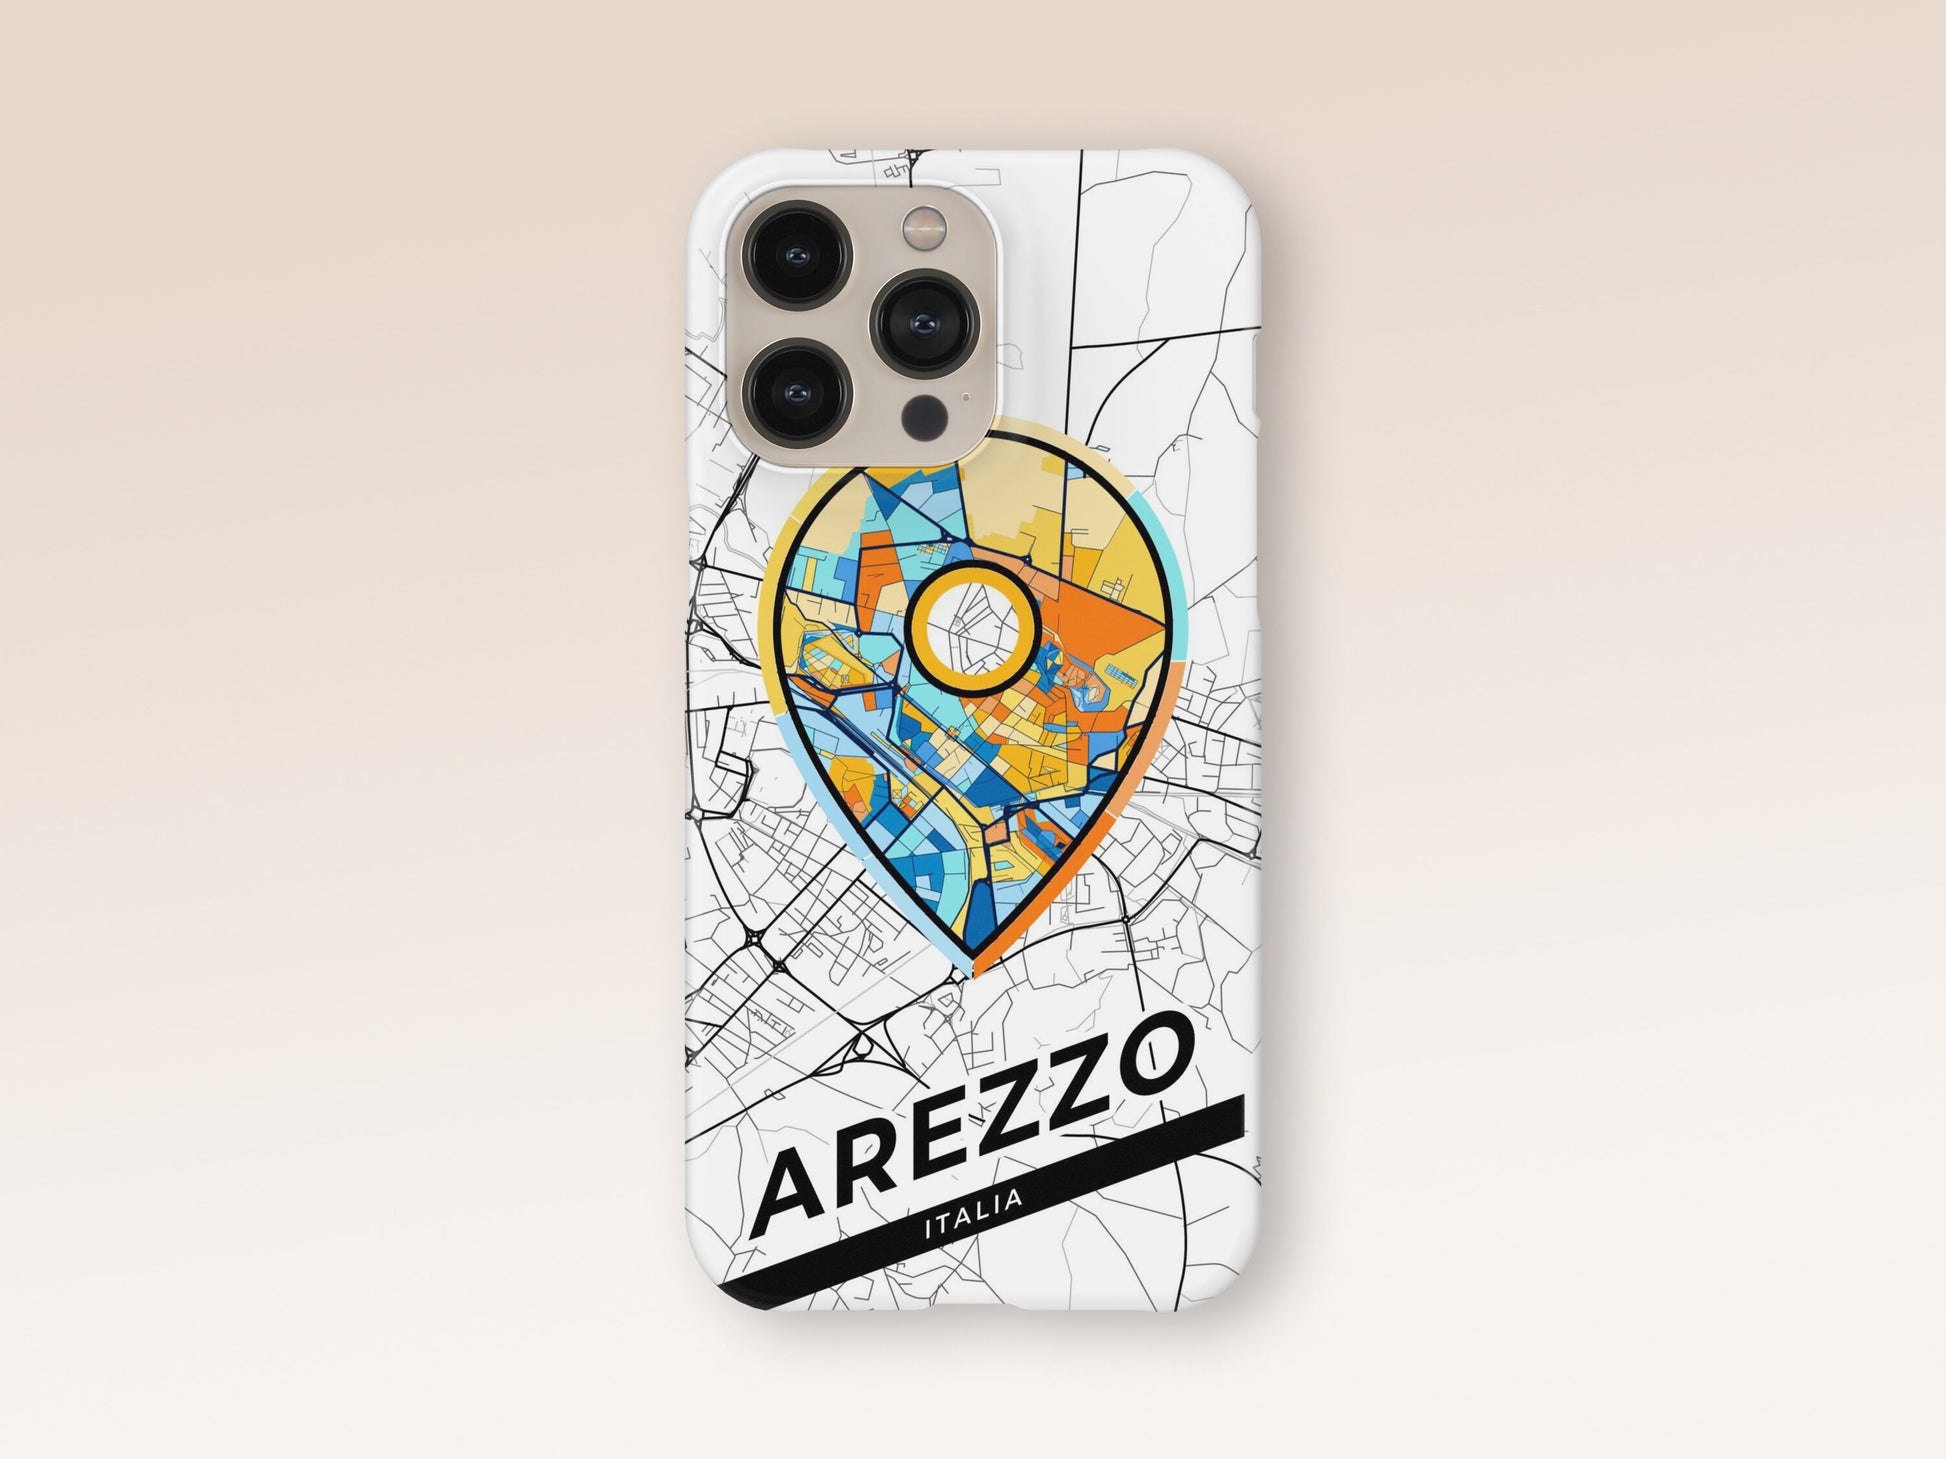 Arezzo Italy slim phone case with colorful icon. Birthday, wedding or housewarming gift. Couple match cases. 1